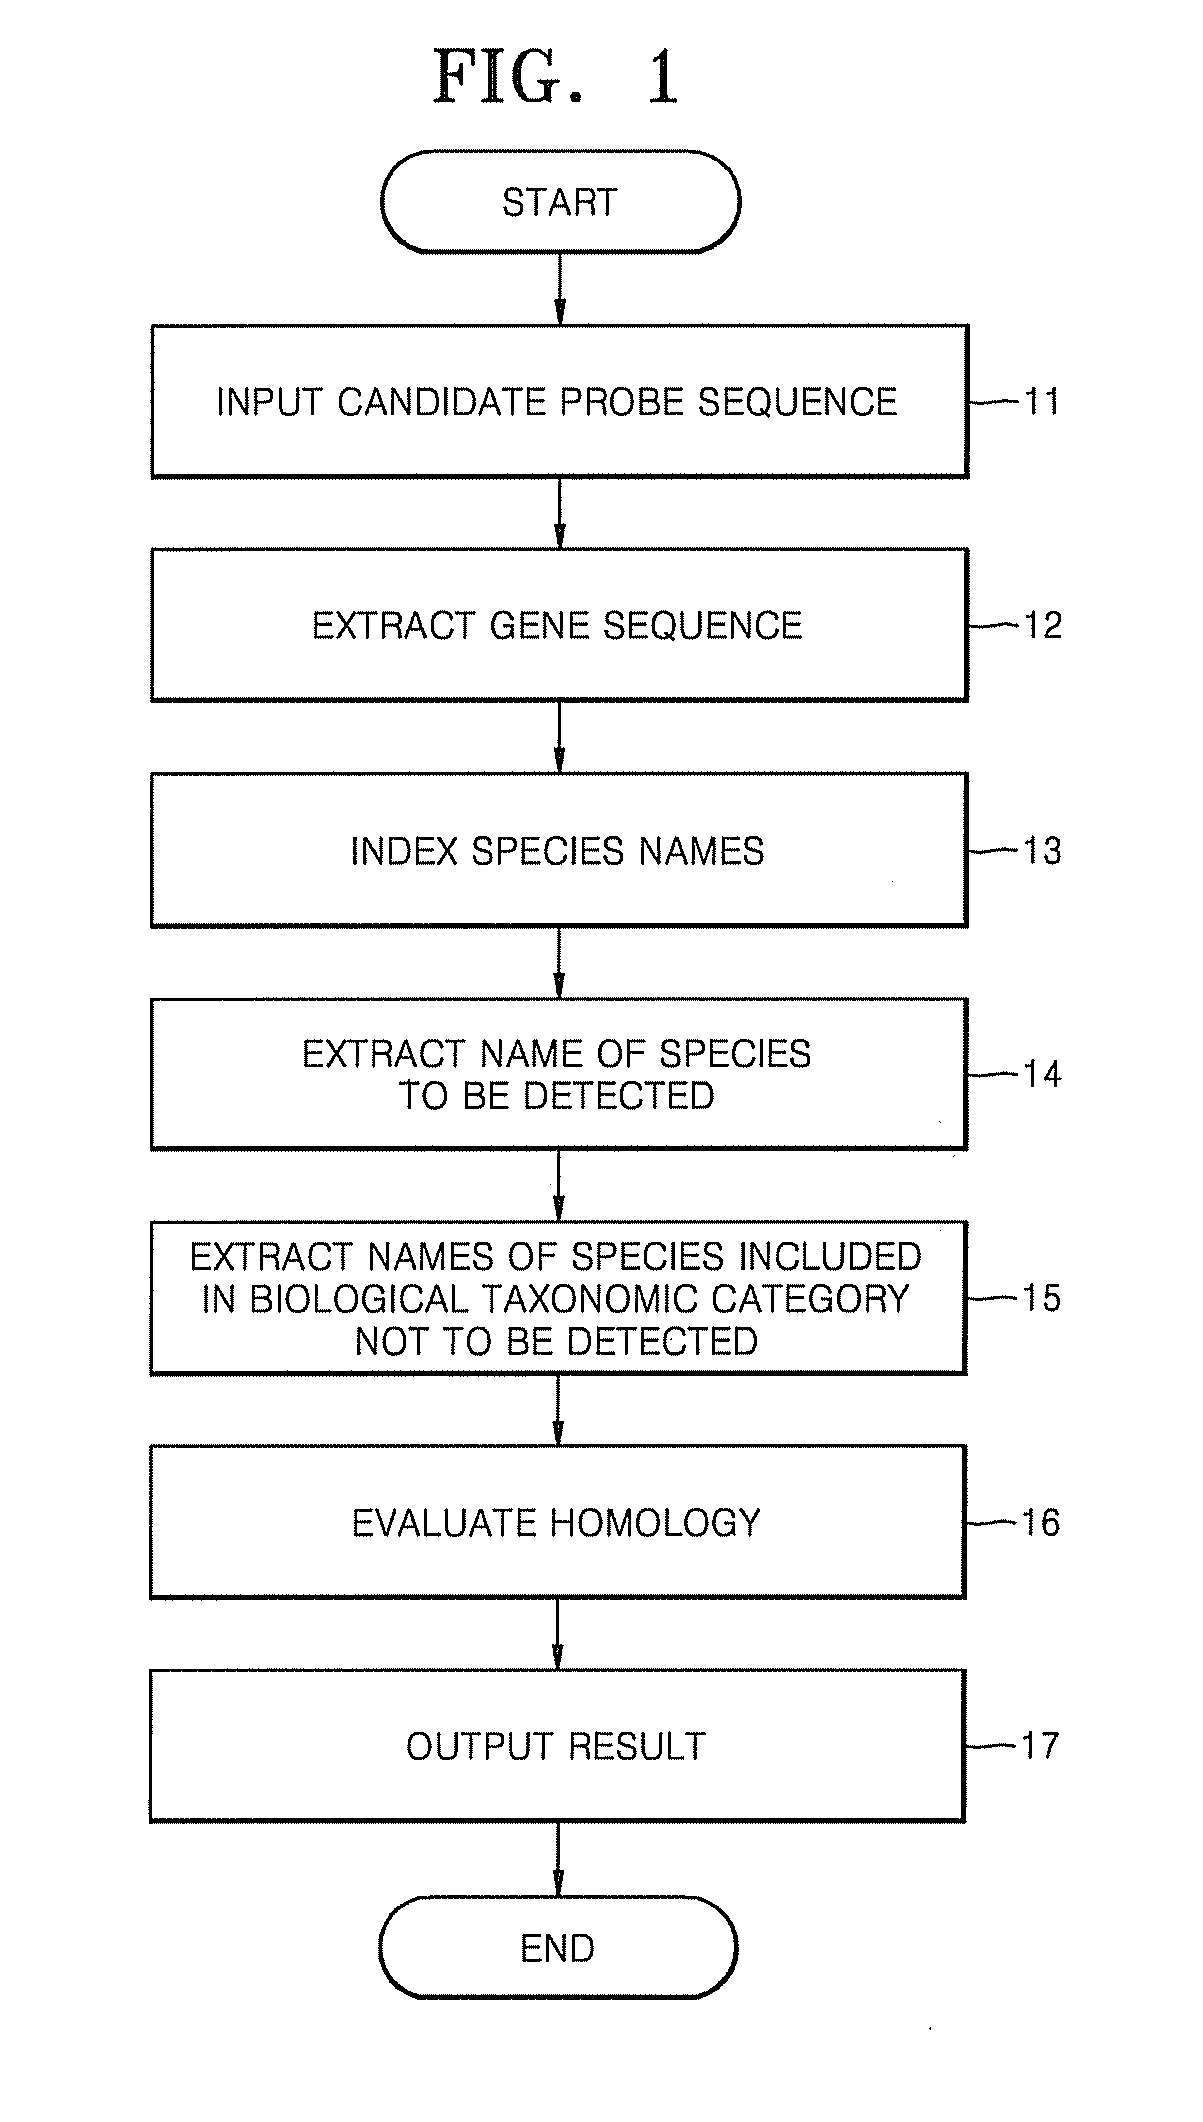 Method and apparatus for determining specificity of a candidate probe